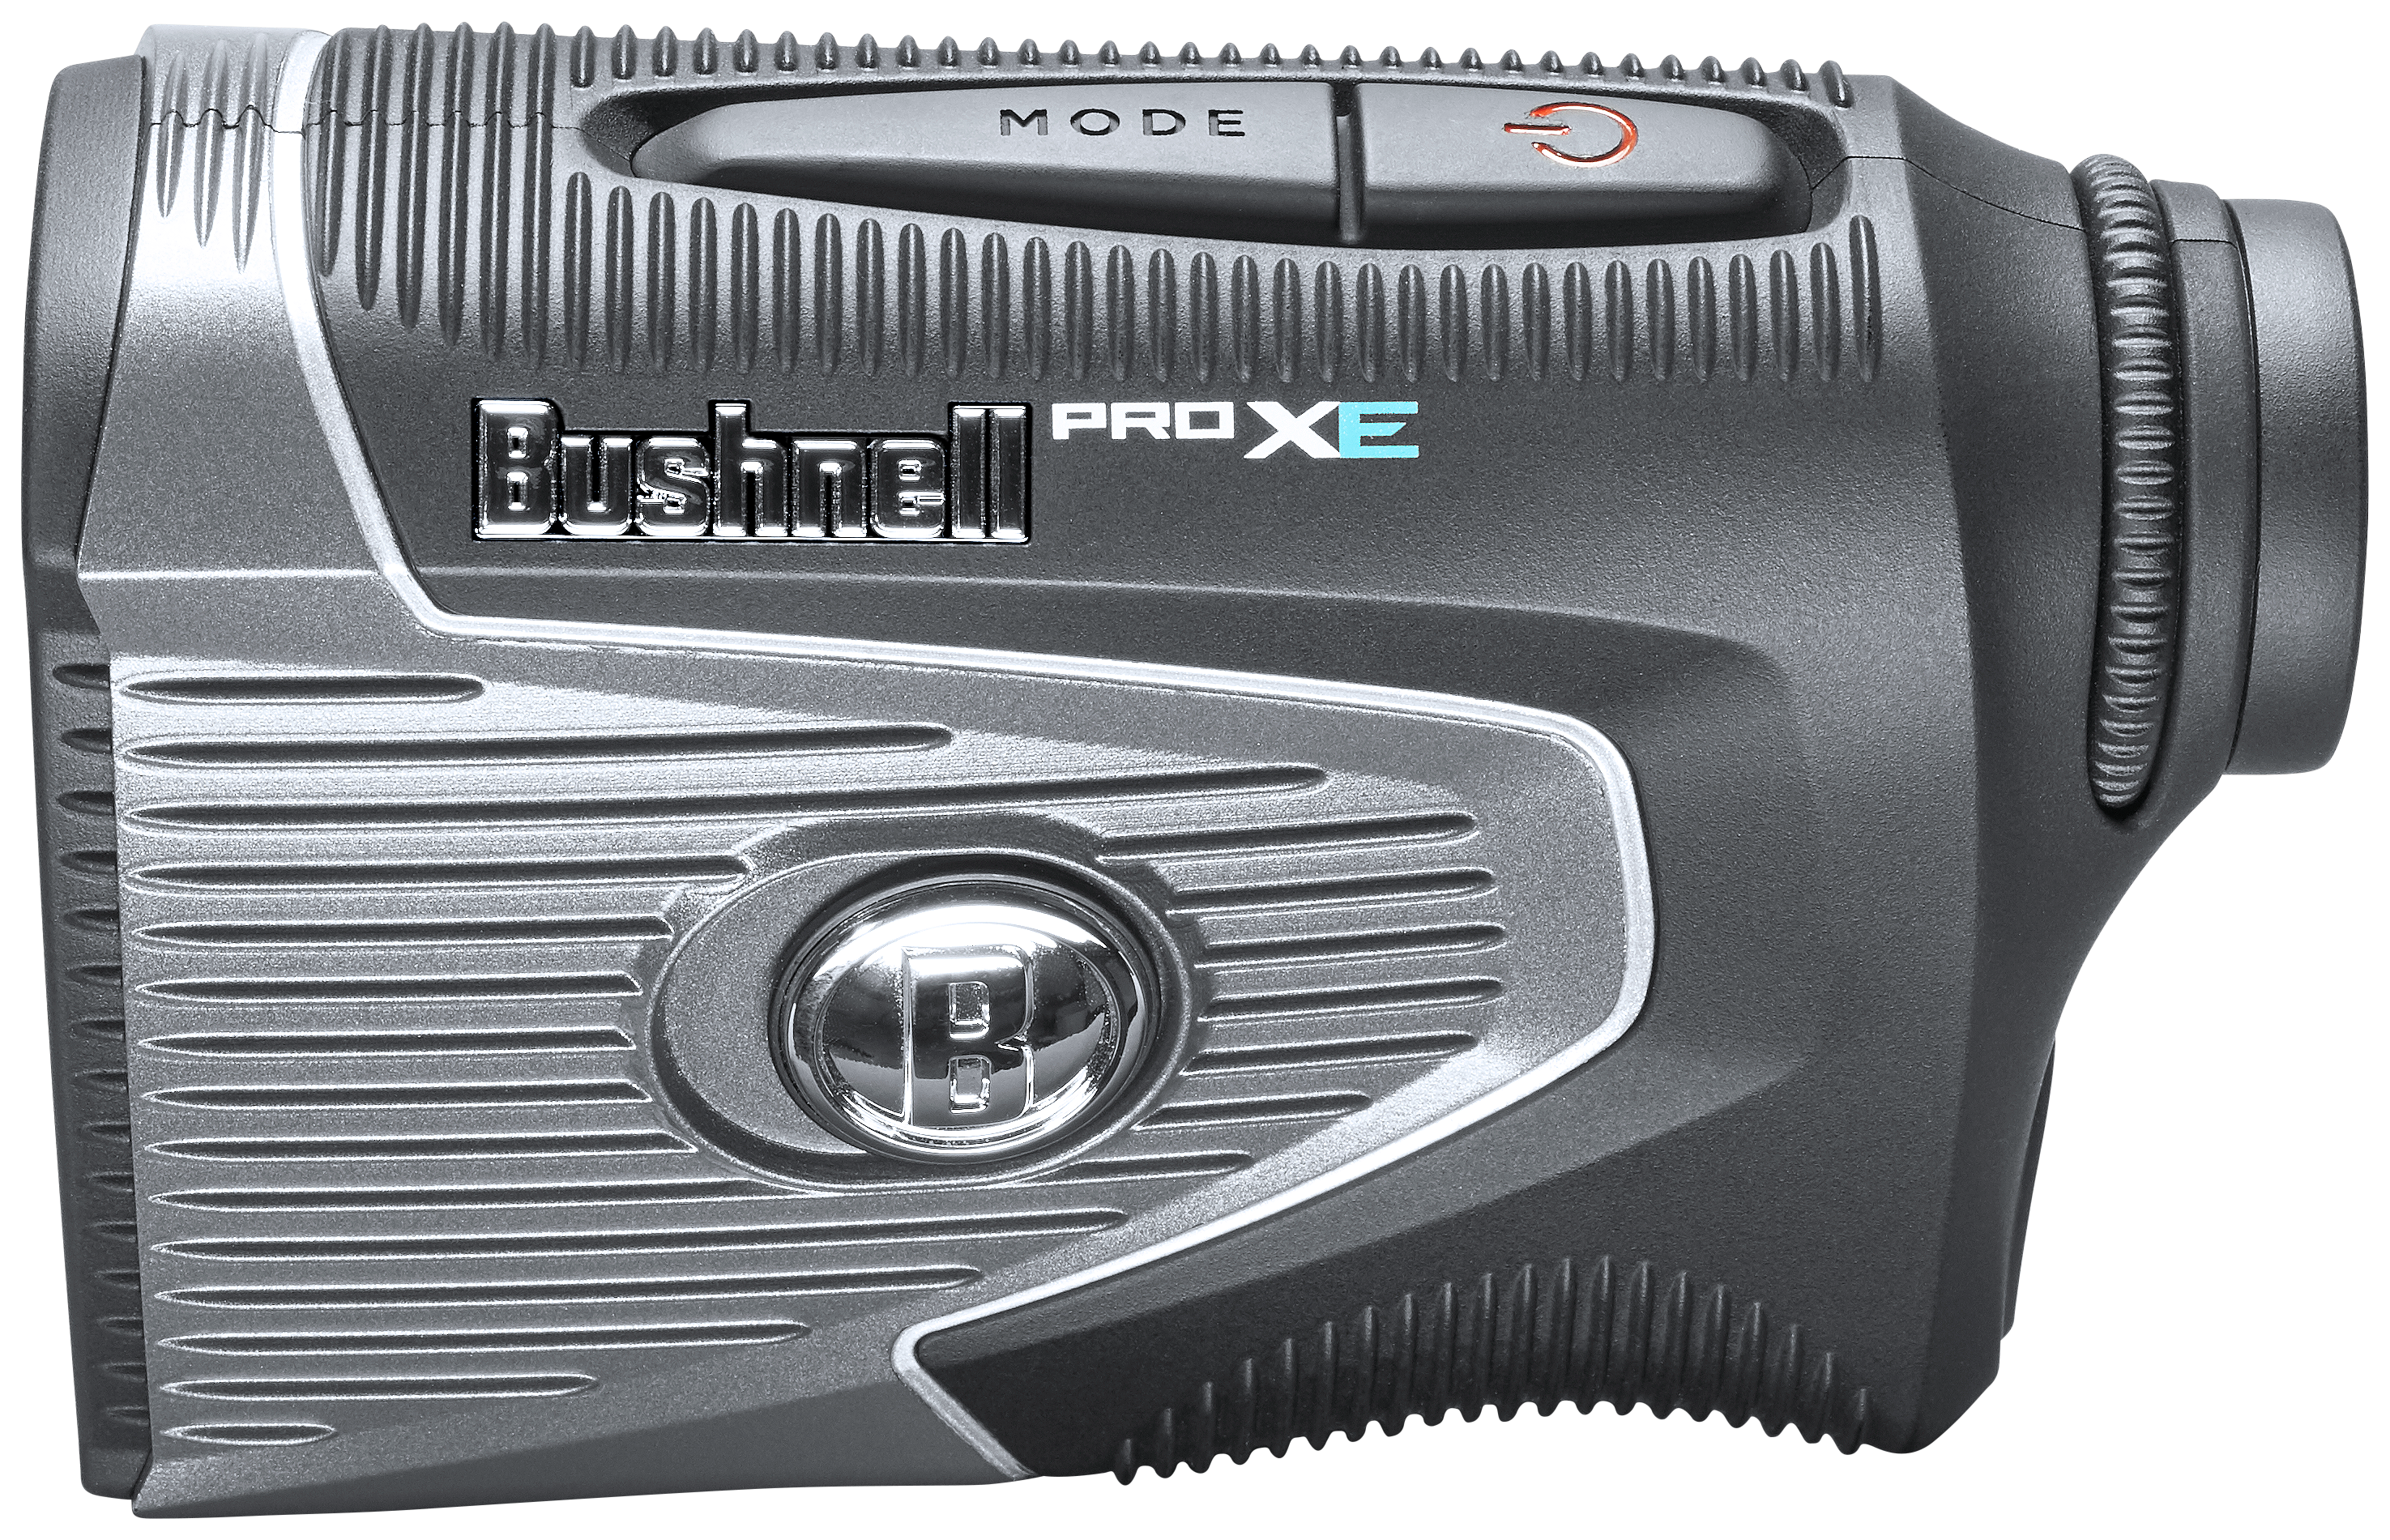 Bushnell's Pro XE is the first rangefinder to 'predict the